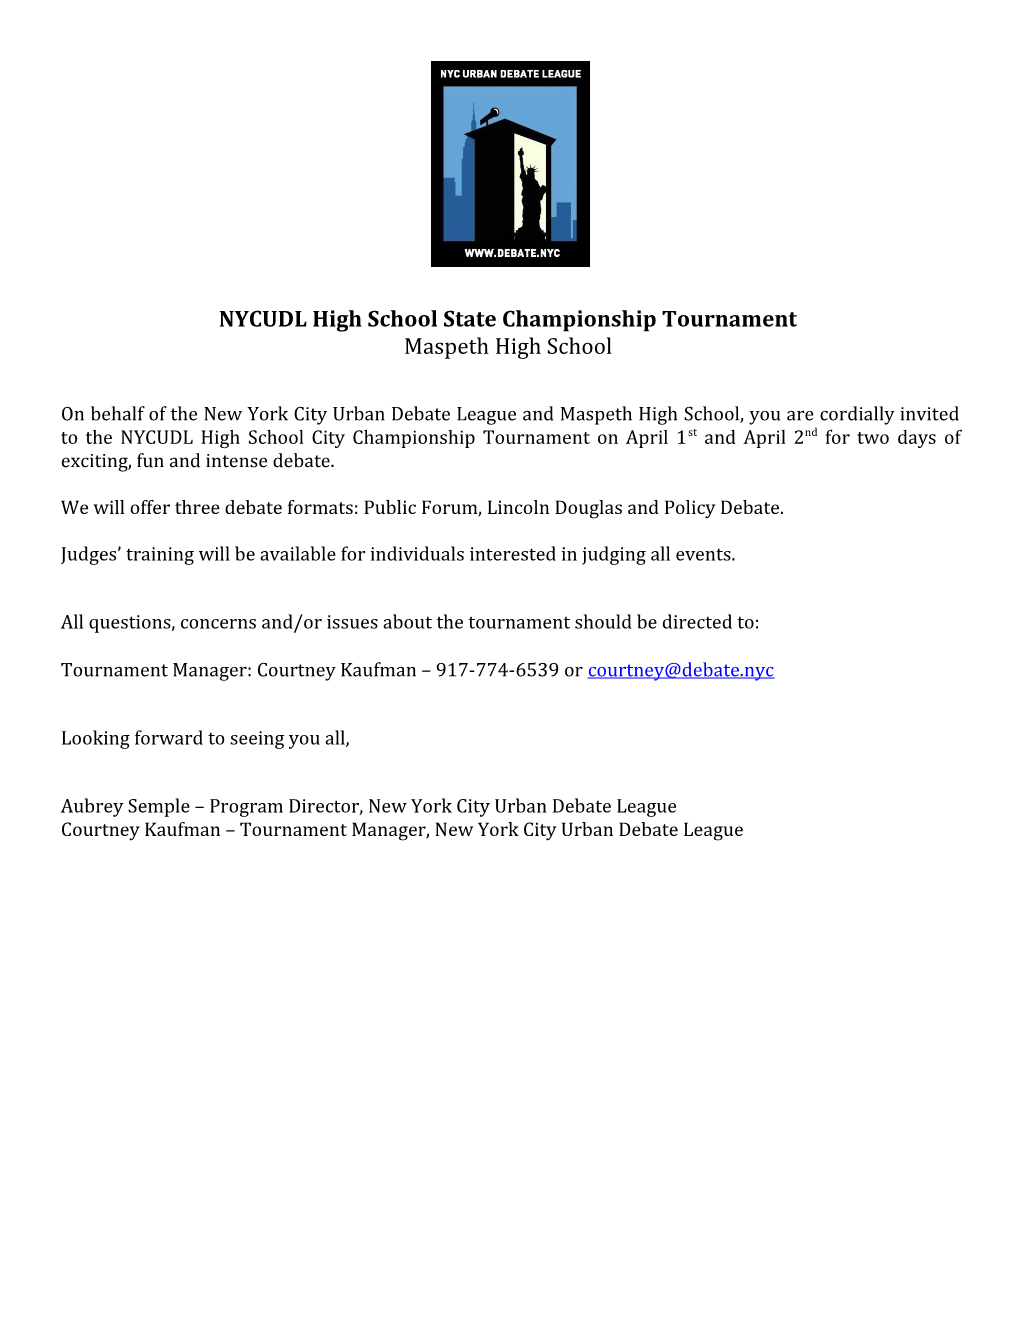 NYCUDL High School State Championship Tournament